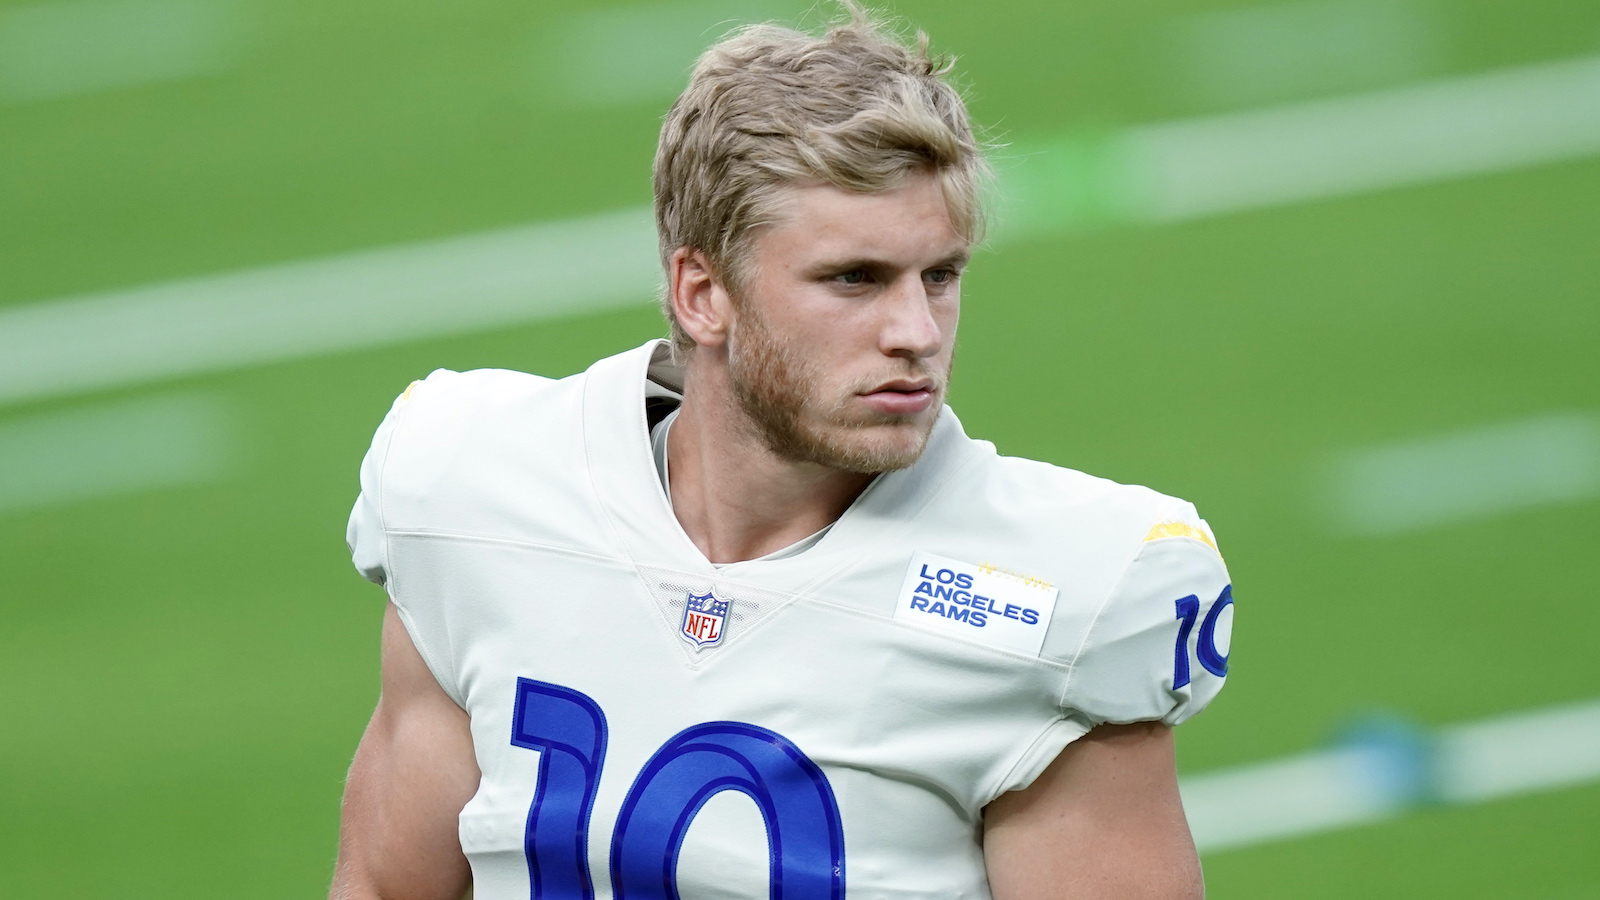 Cooper Kupp signed his extension wearing a Matthew Stafford jersey